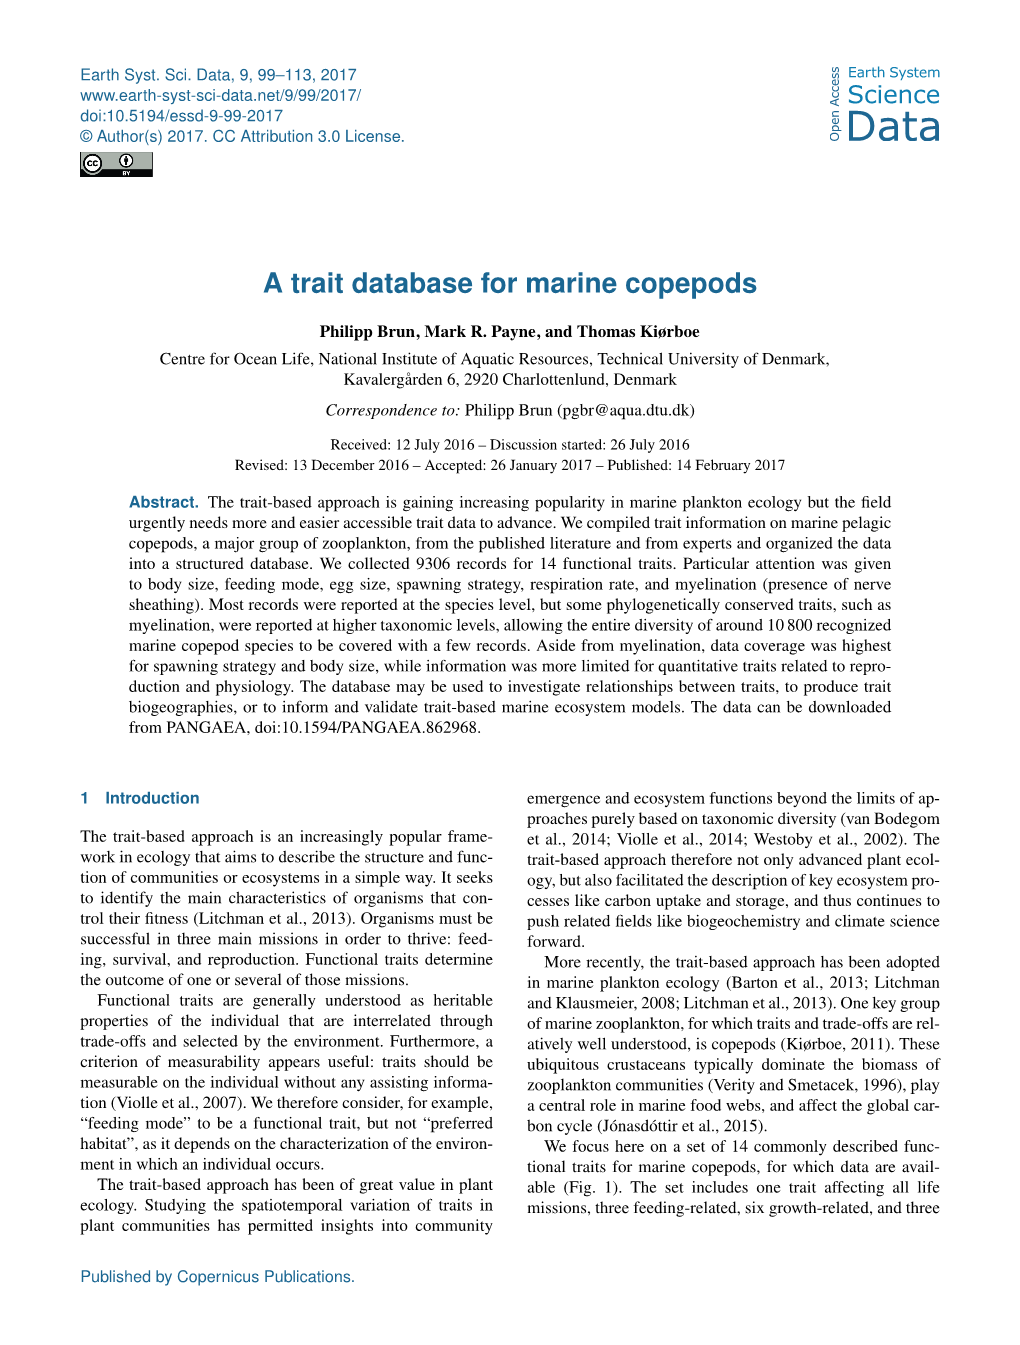 A Trait Database for Marine Copepods